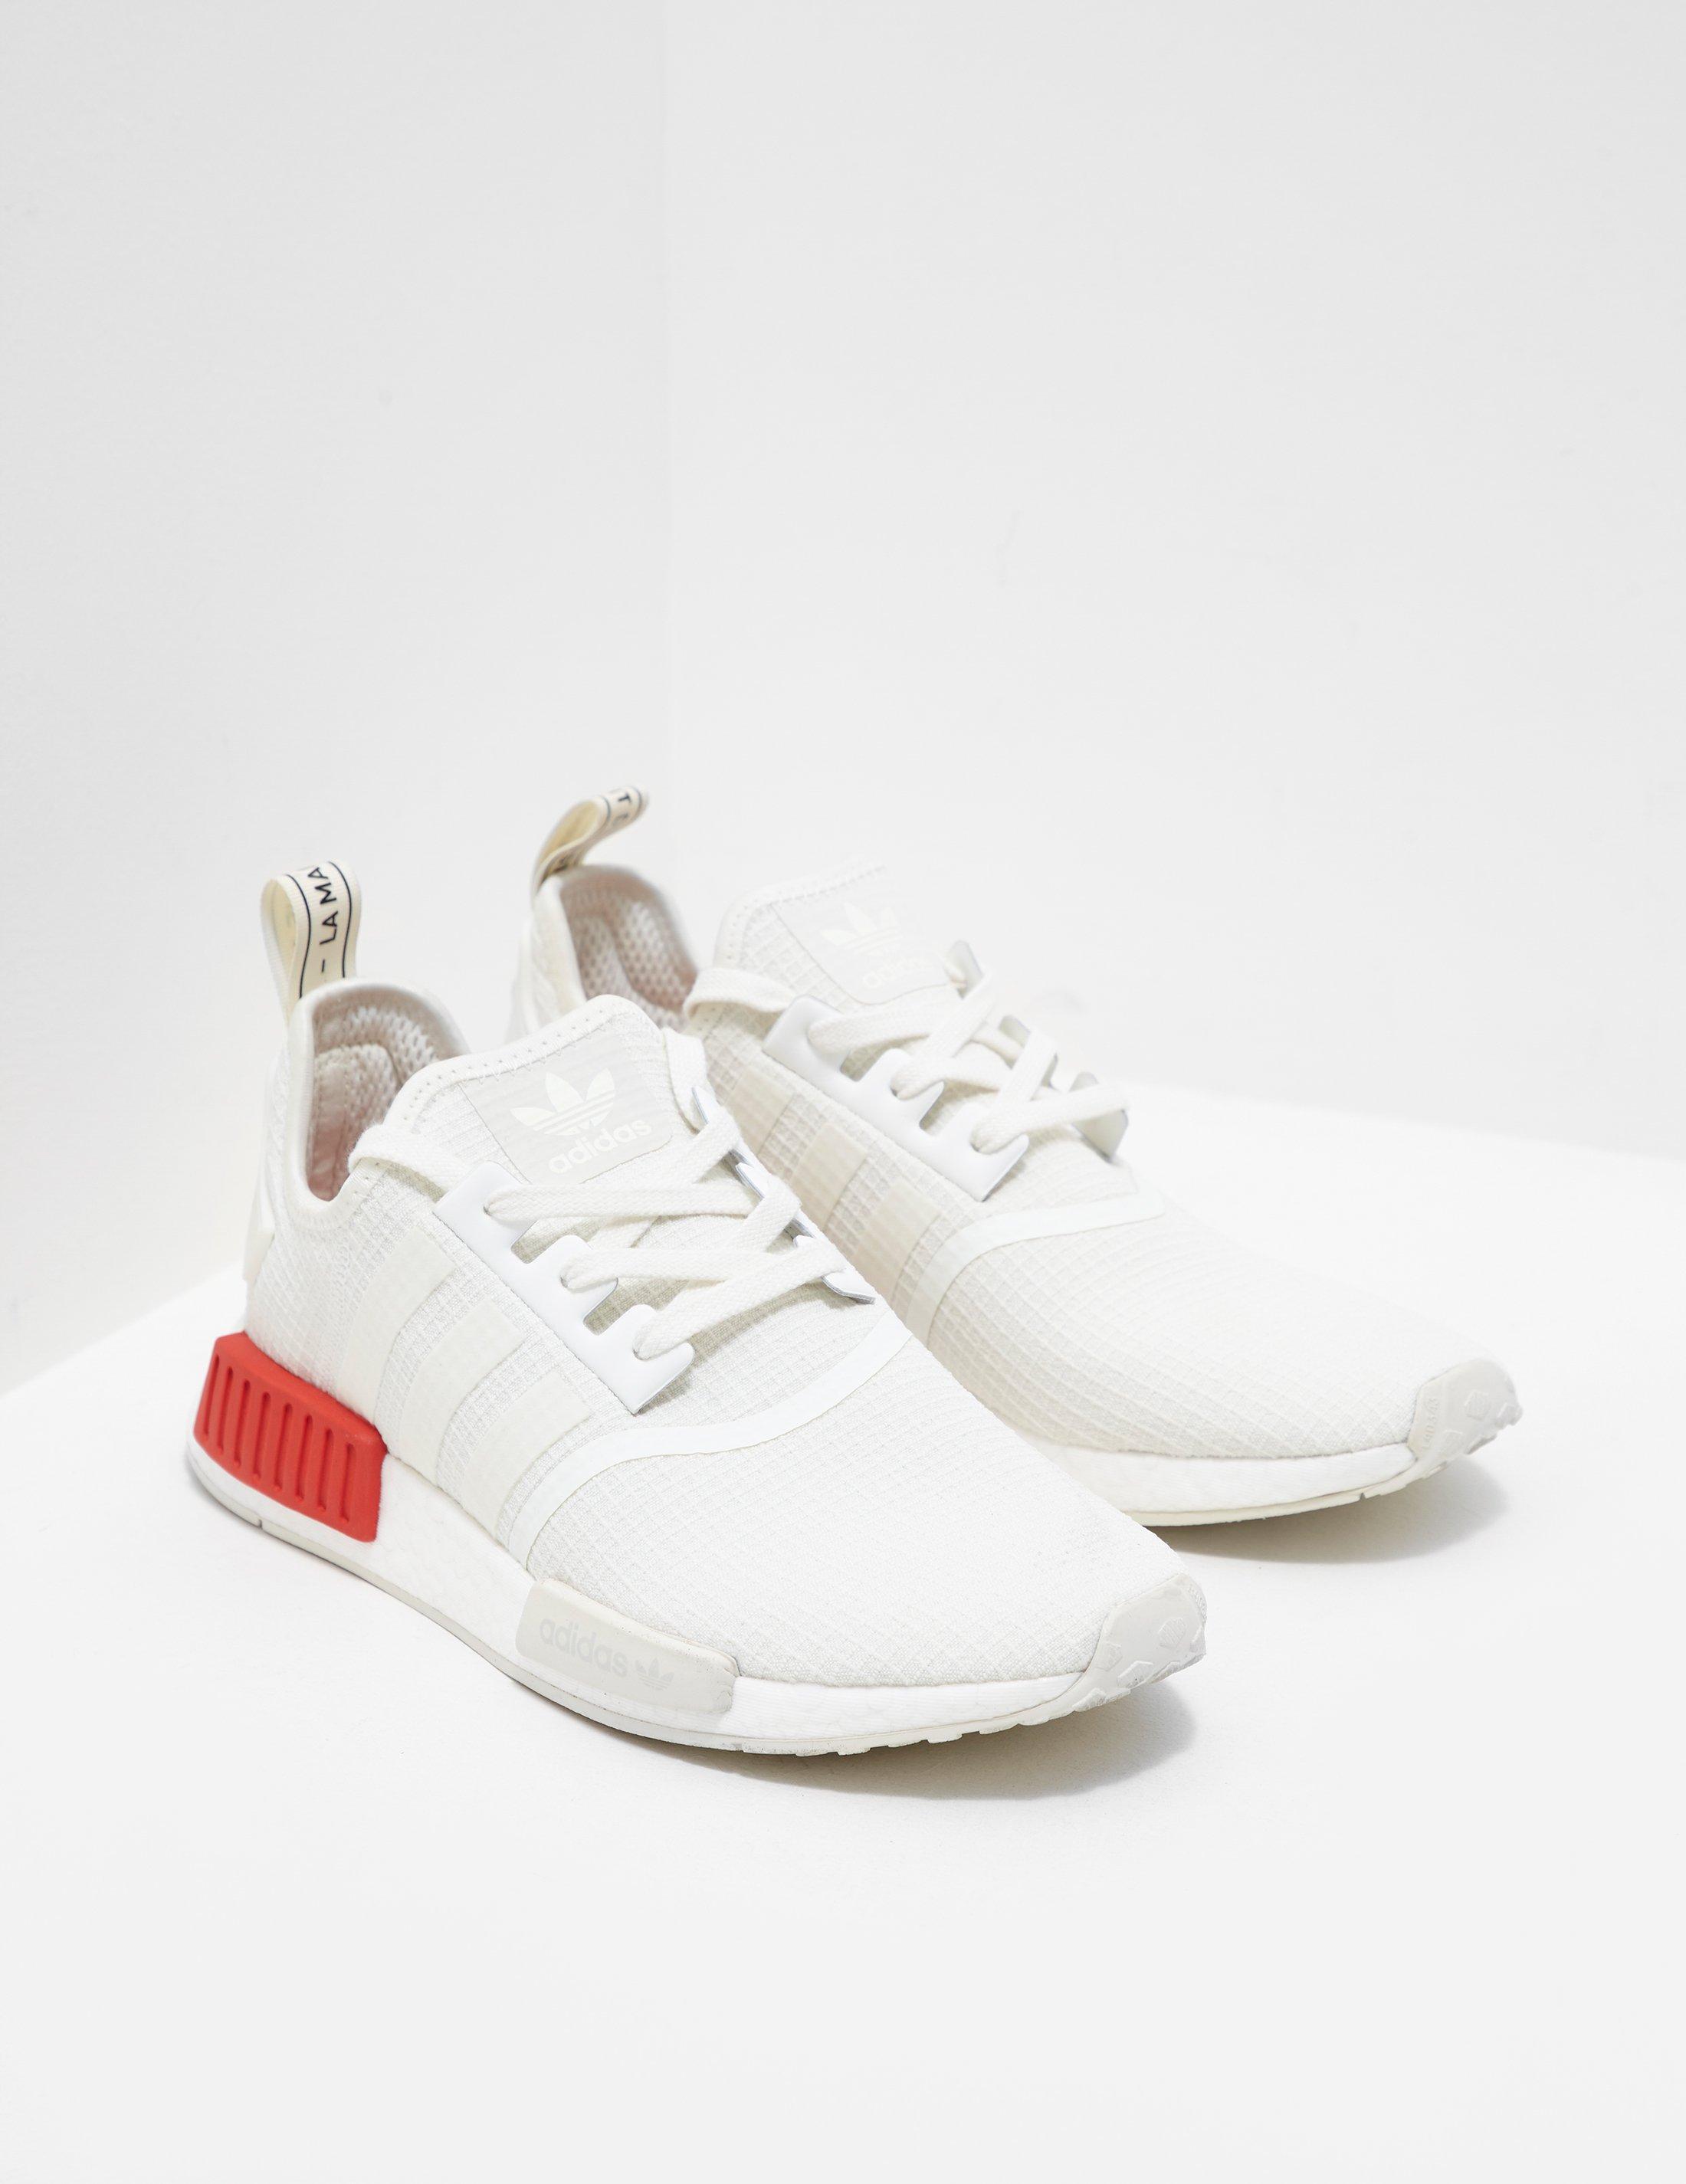 nmd r1 ripstop white